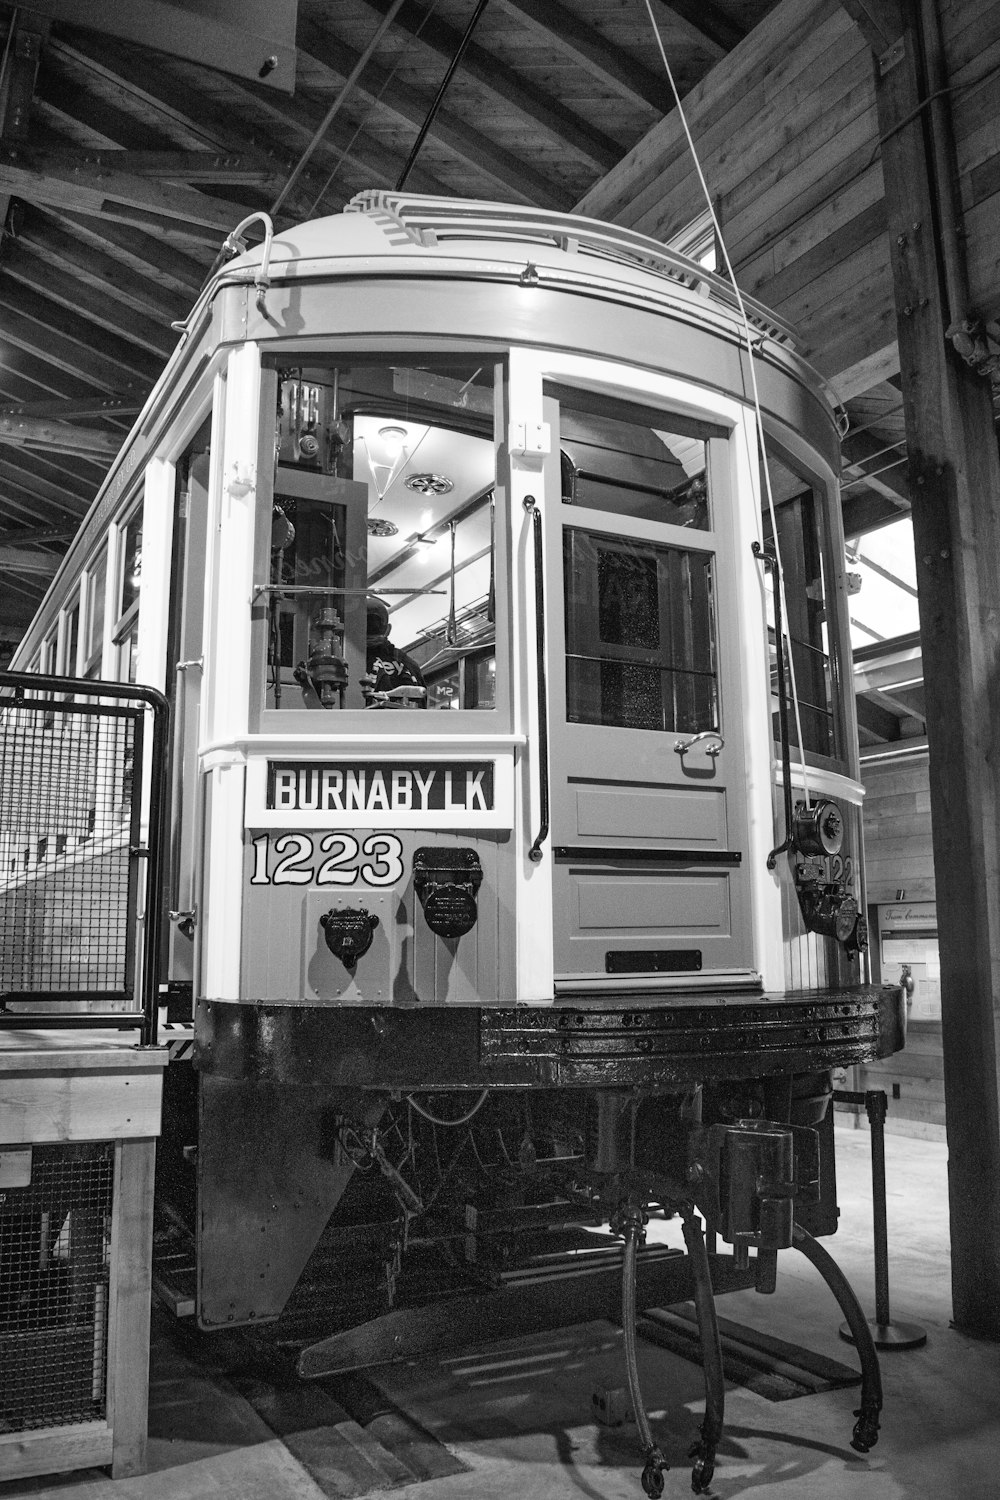 a black and white photo of a trolley car